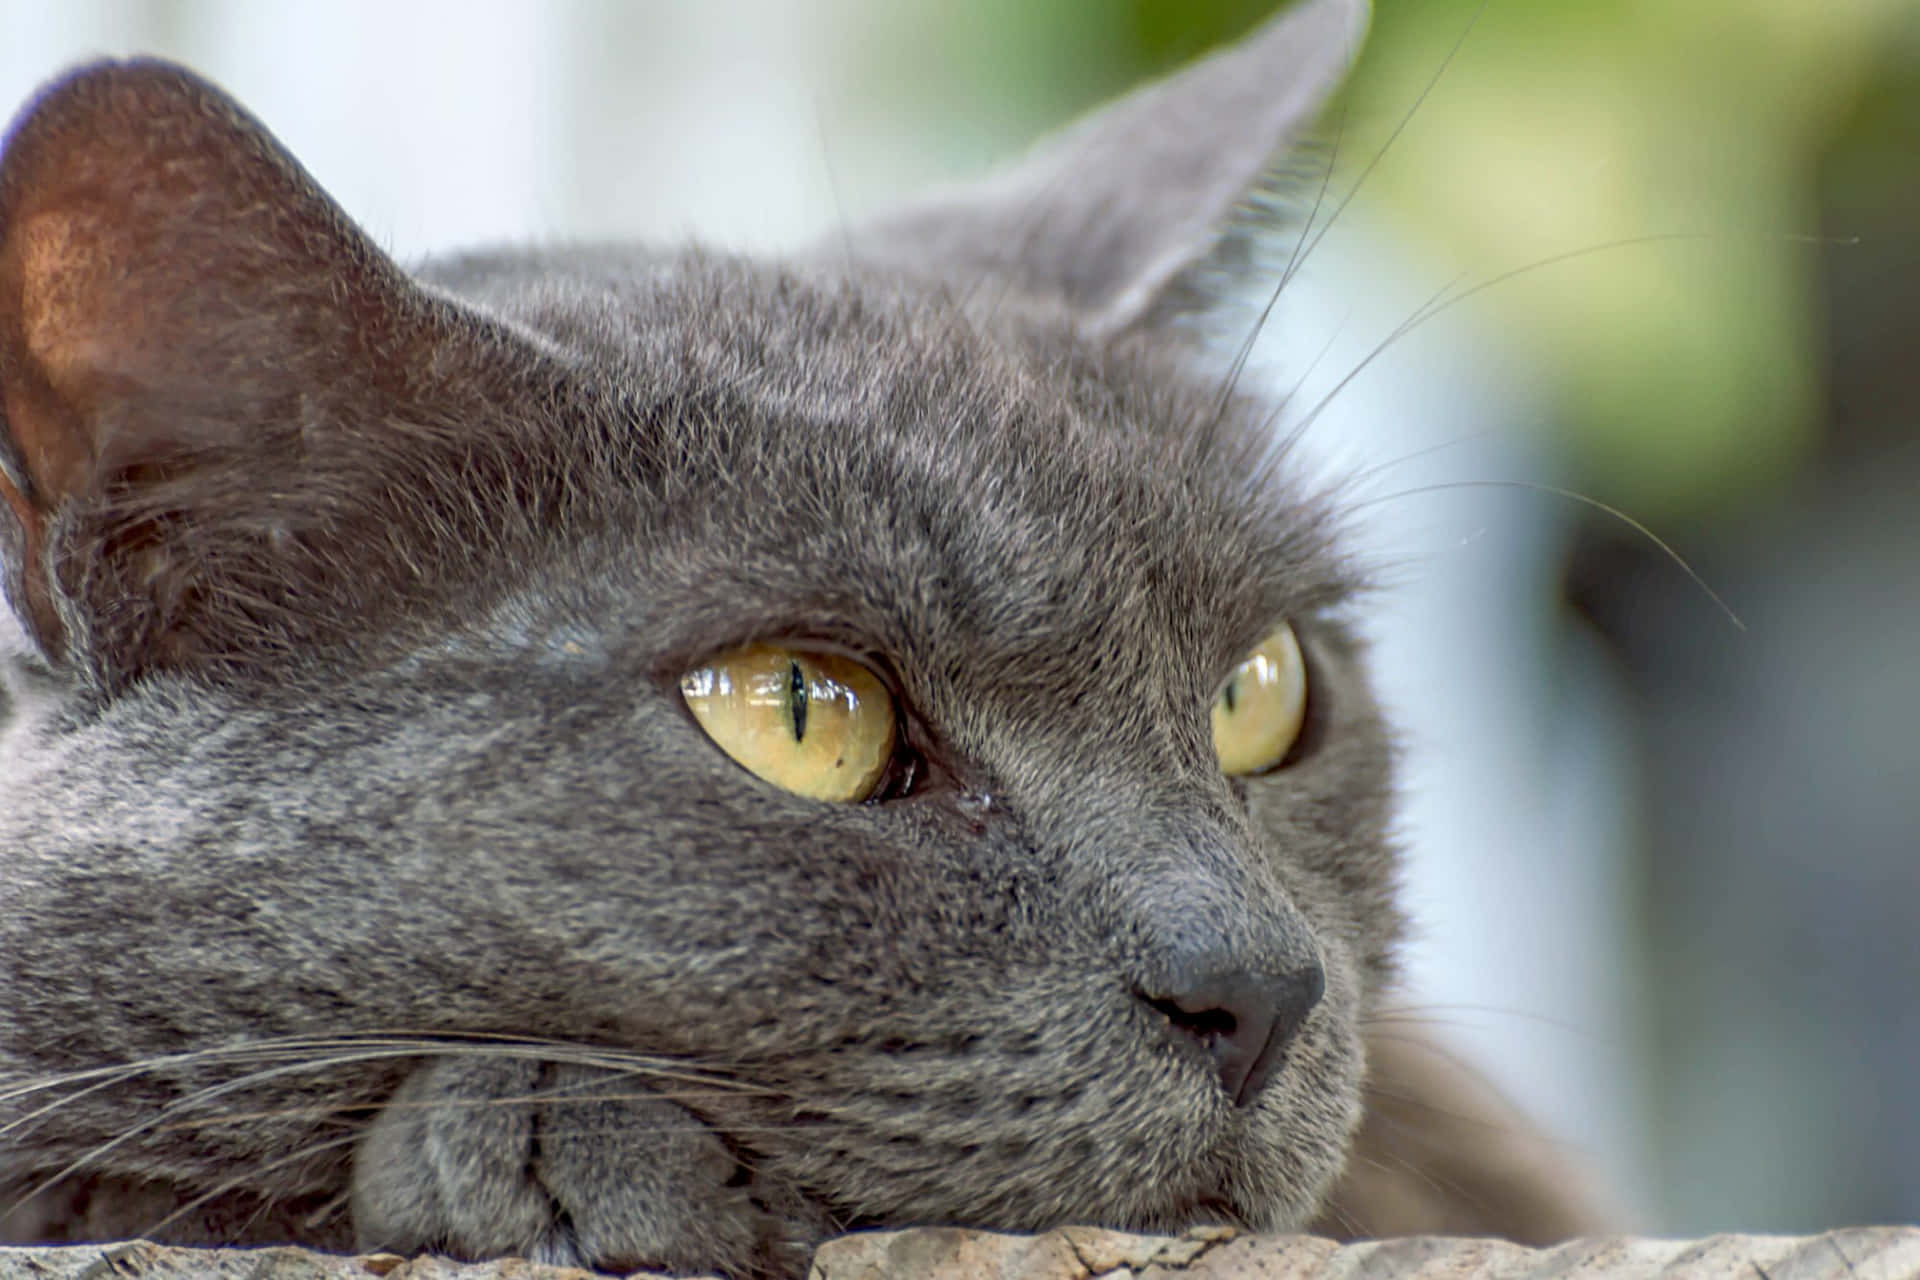 "Cuddle Time with this Adorable Russian Blue Cat"